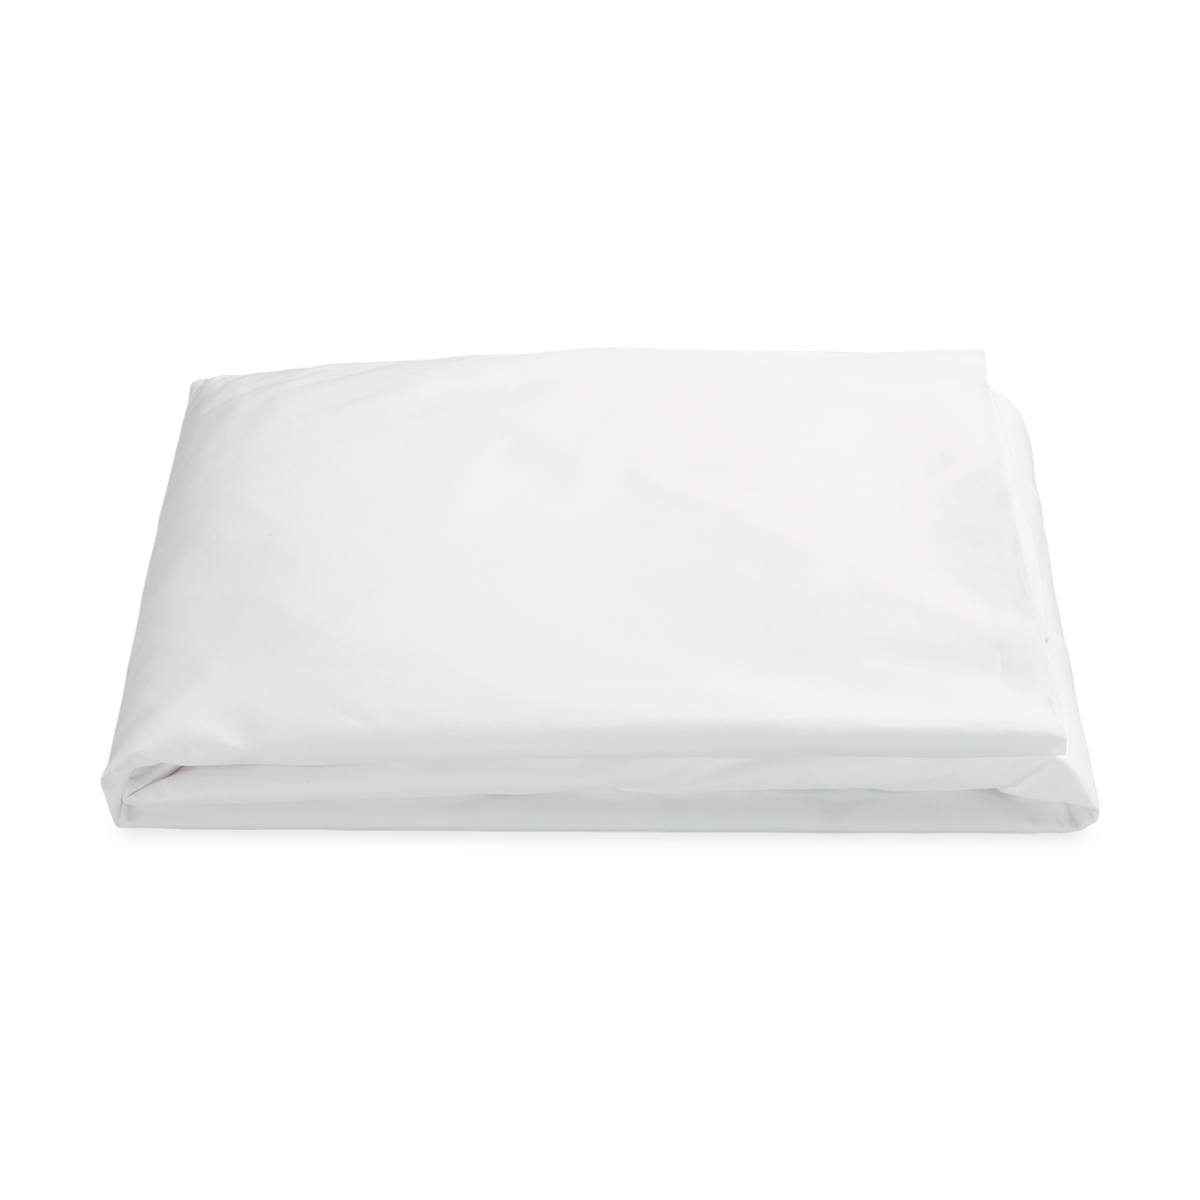 Fitted Sheets of Matouk Gatsby Bedding Bone Color